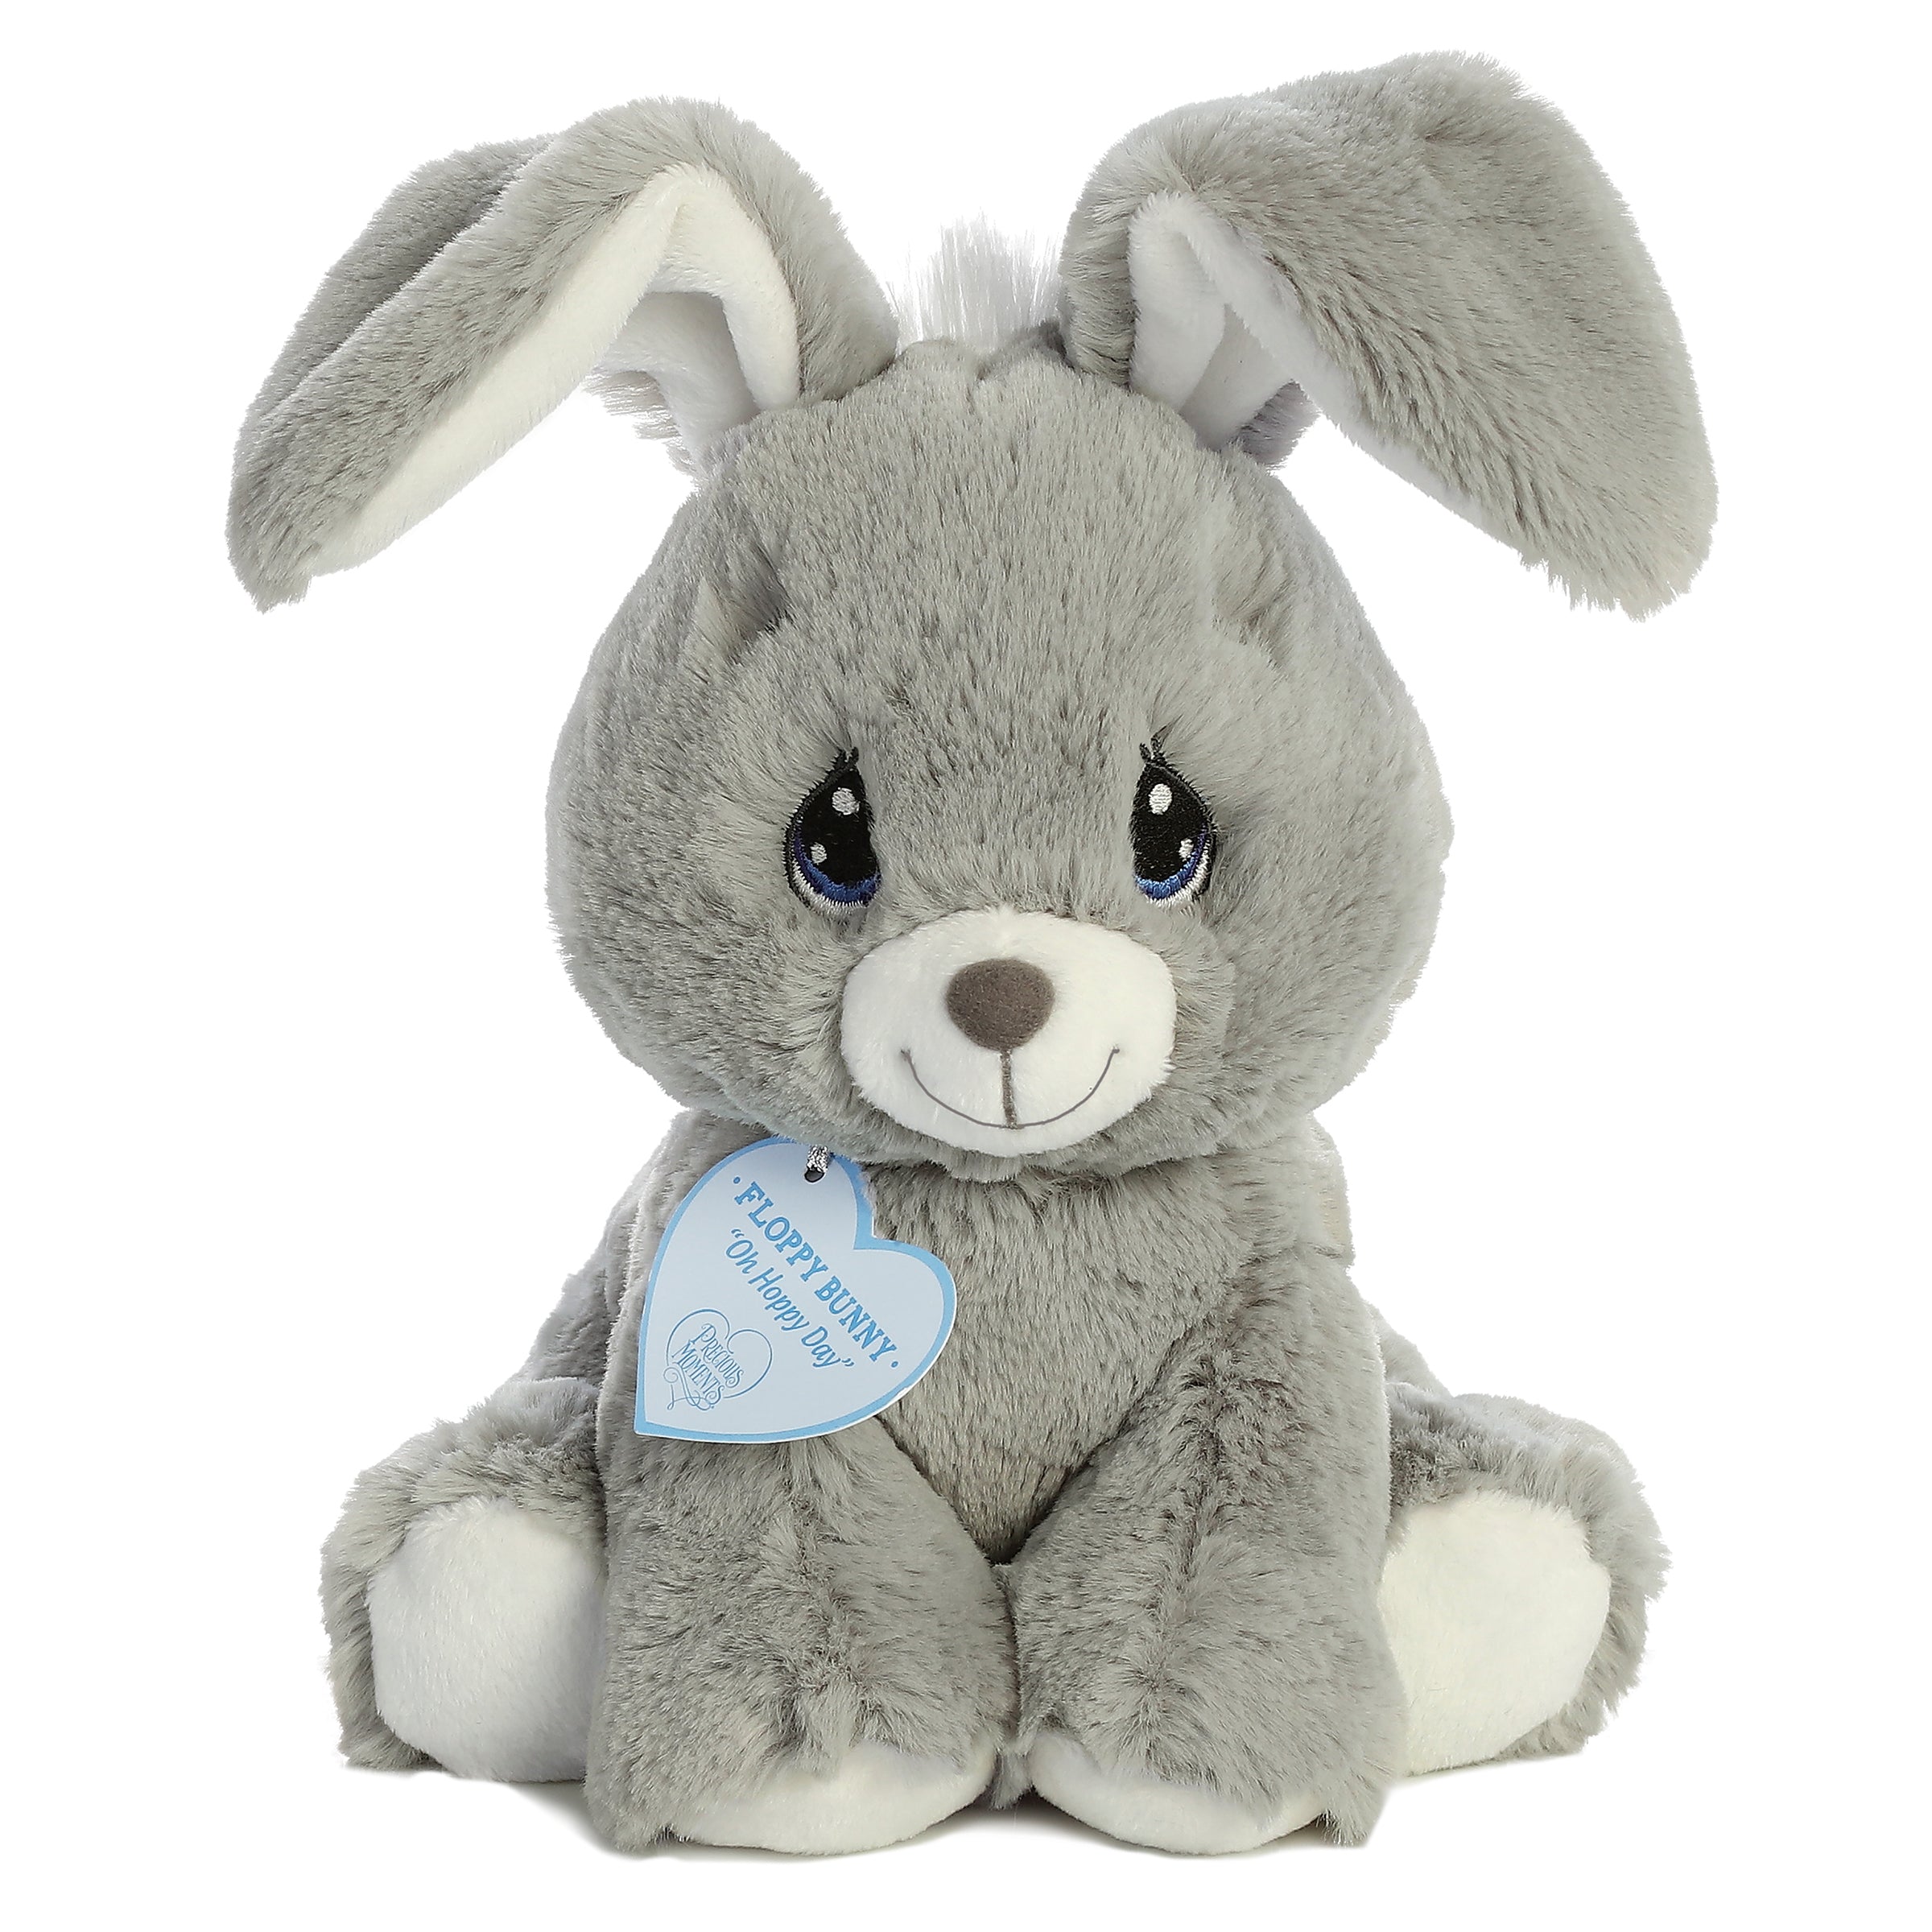 Grey Floppy Bunny plush from Precious Moments, soft tan fabric, detailed for comfort and memory-making